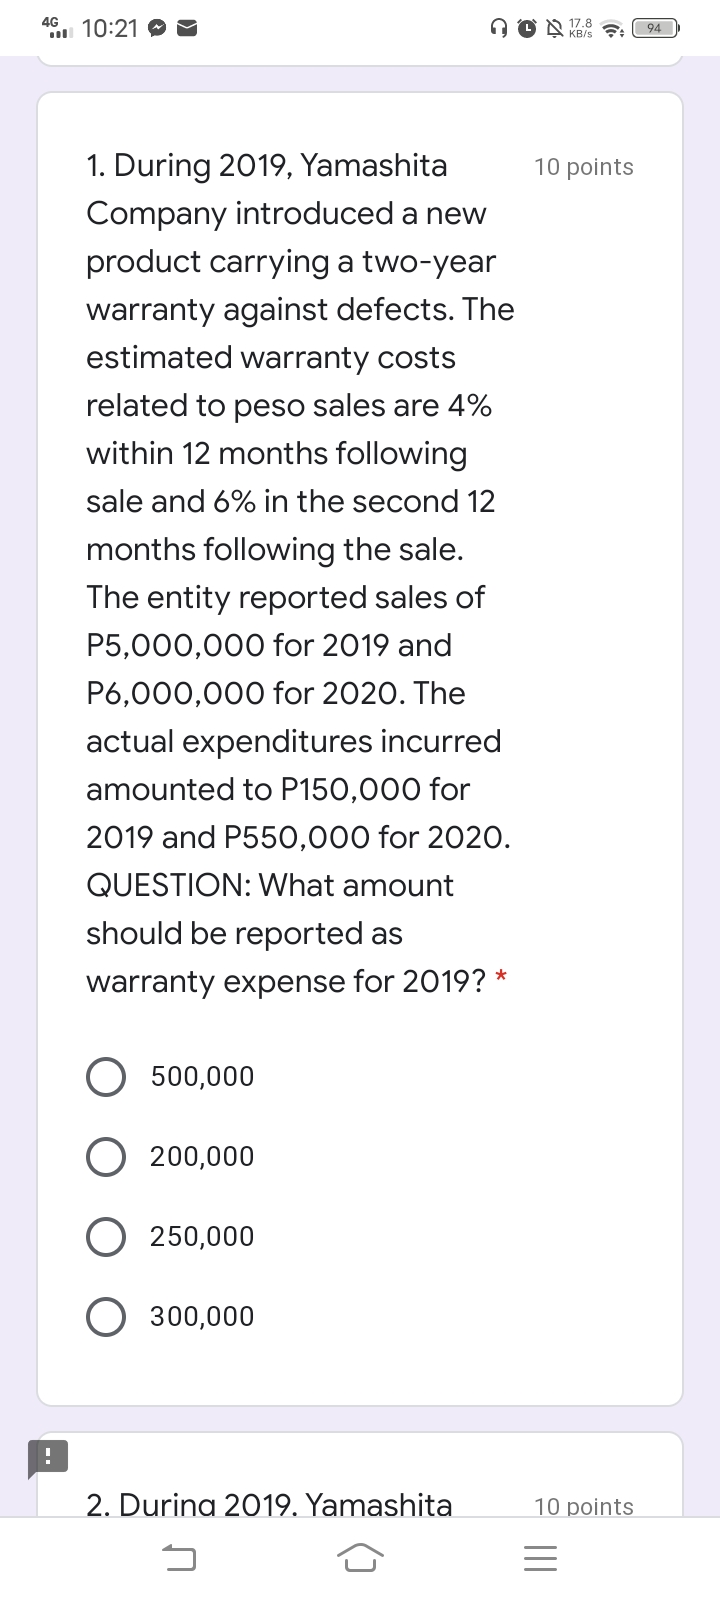 4G
10:21
A O N Z8
KB/s : 94
1. During 2019, Yamashita
10 points
Company introduced a new
product carrying a two-year
warranty against defects. The
estimated warranty costs
related to peso sales are 4%
within 12 months following
sale and 6% in the second 12
months following the sale.
The entity reported sales of
P5,000,000 for 2019 and
P6,000,000 for 2020. The
actual expenditures incurred
amounted to P150,000 for
2019 and P550,000 for 2020.
QUESTION: What amount
should be reported as
warranty expense for 2019? *
500,000
200,000
250,000
300,000
2. Durina 2019. Yamashita
10 points
